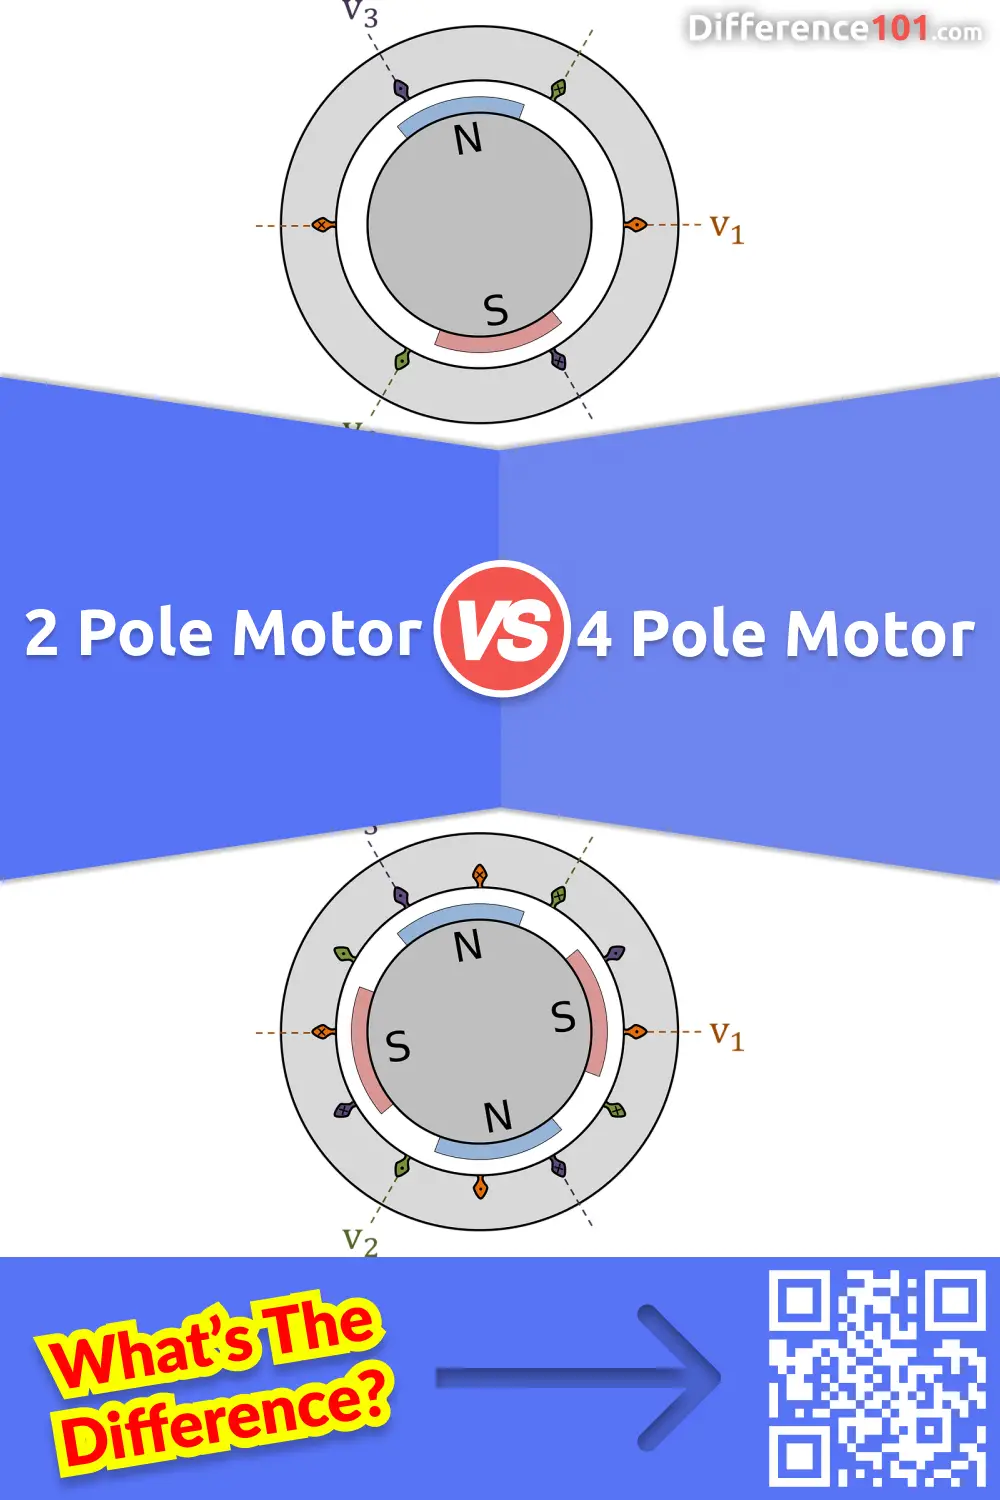 pitch medley fund 2 Pole Motor vs. 4 Pole Motor: 7 Key Differences, Pros & Cons, FAQs |  Difference 101